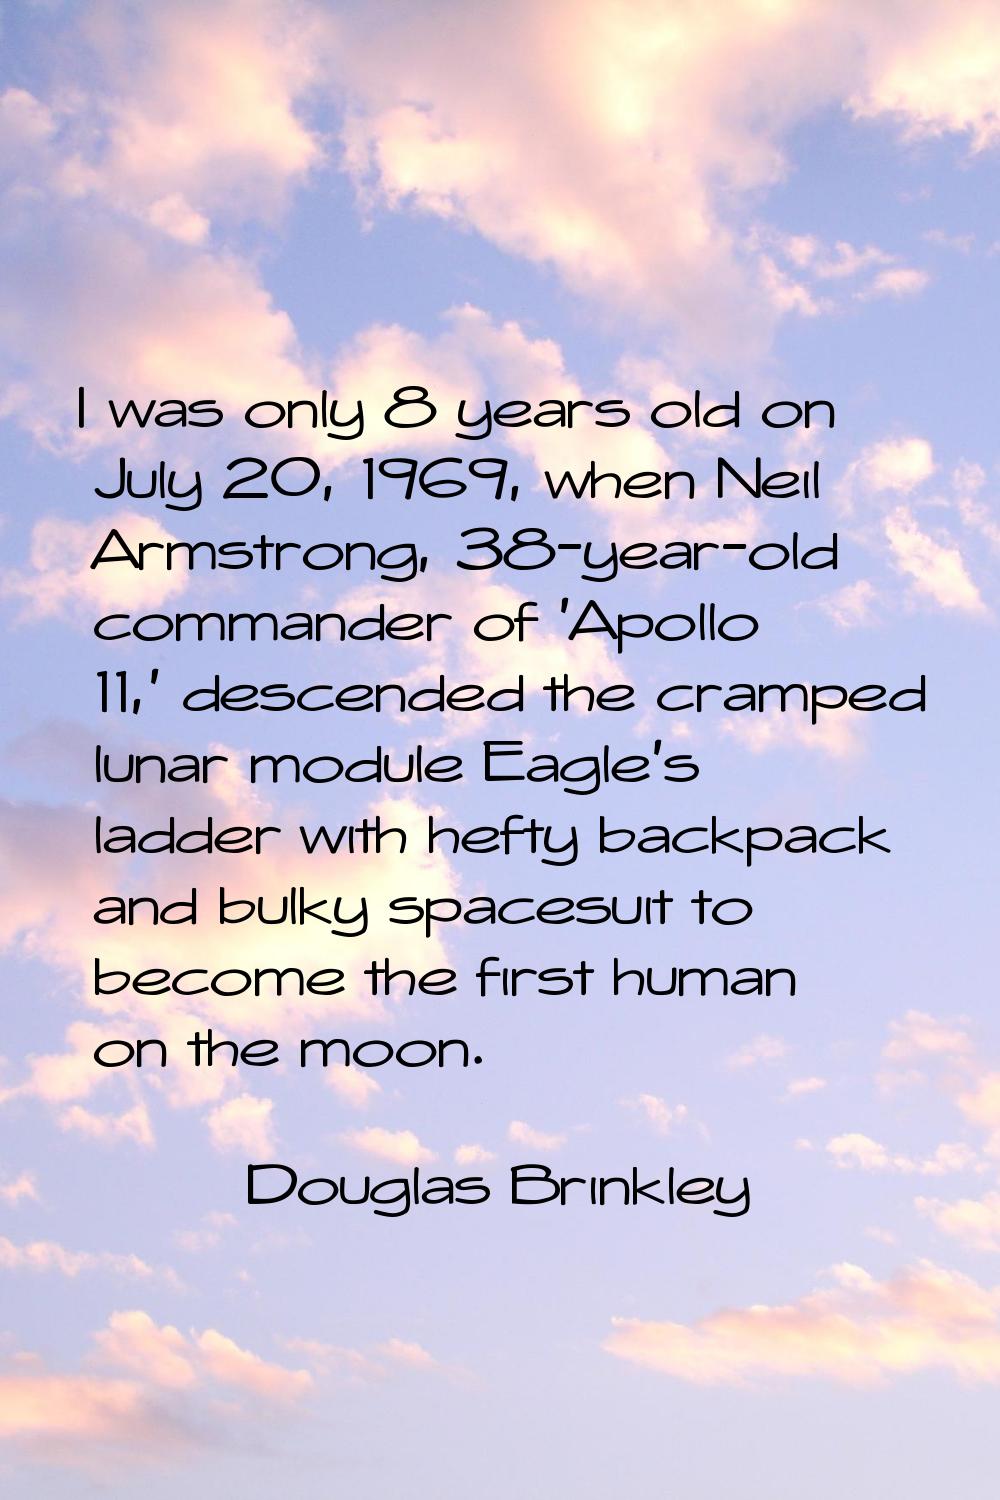 I was only 8 years old on July 20, 1969, when Neil Armstrong, 38-year-old commander of 'Apollo 11,'